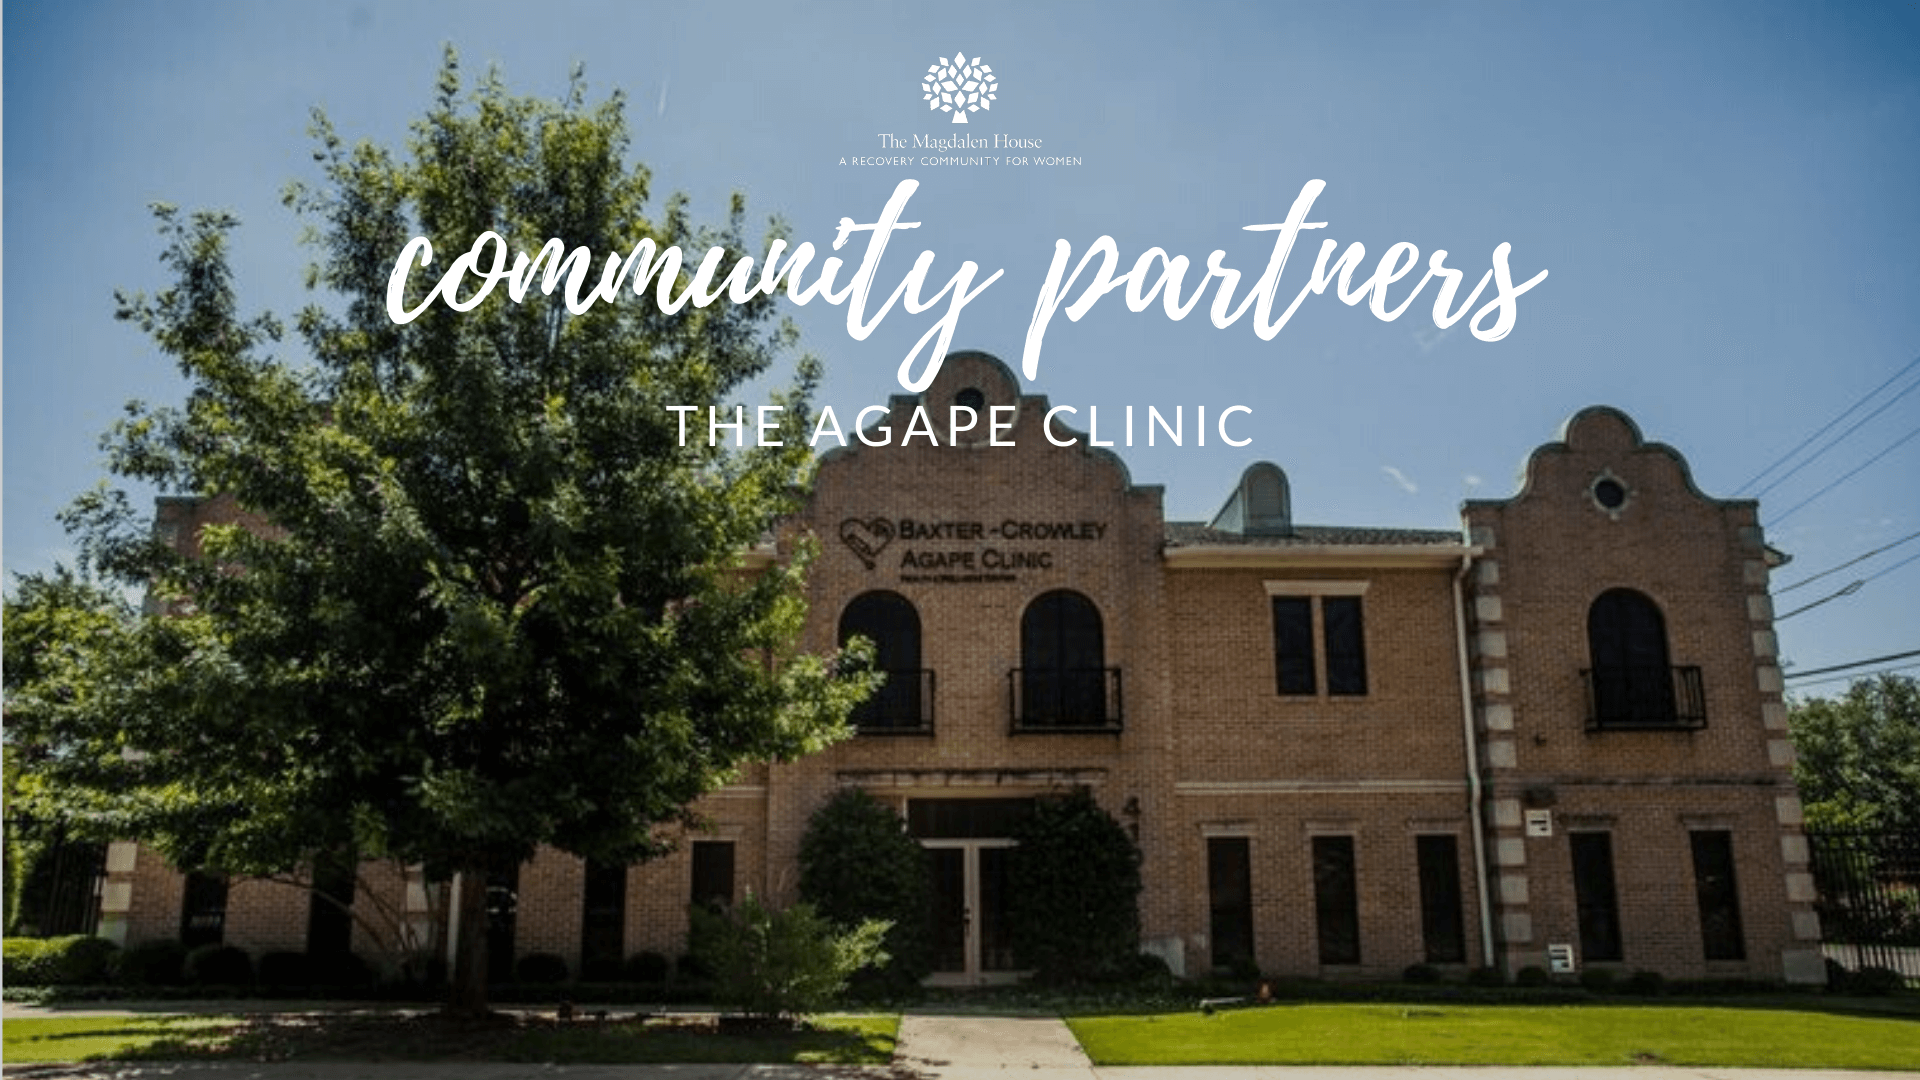 Providing Dental and Health Care to Help Alcoholic Women Continue in Their Recovery | The Agape Clinic